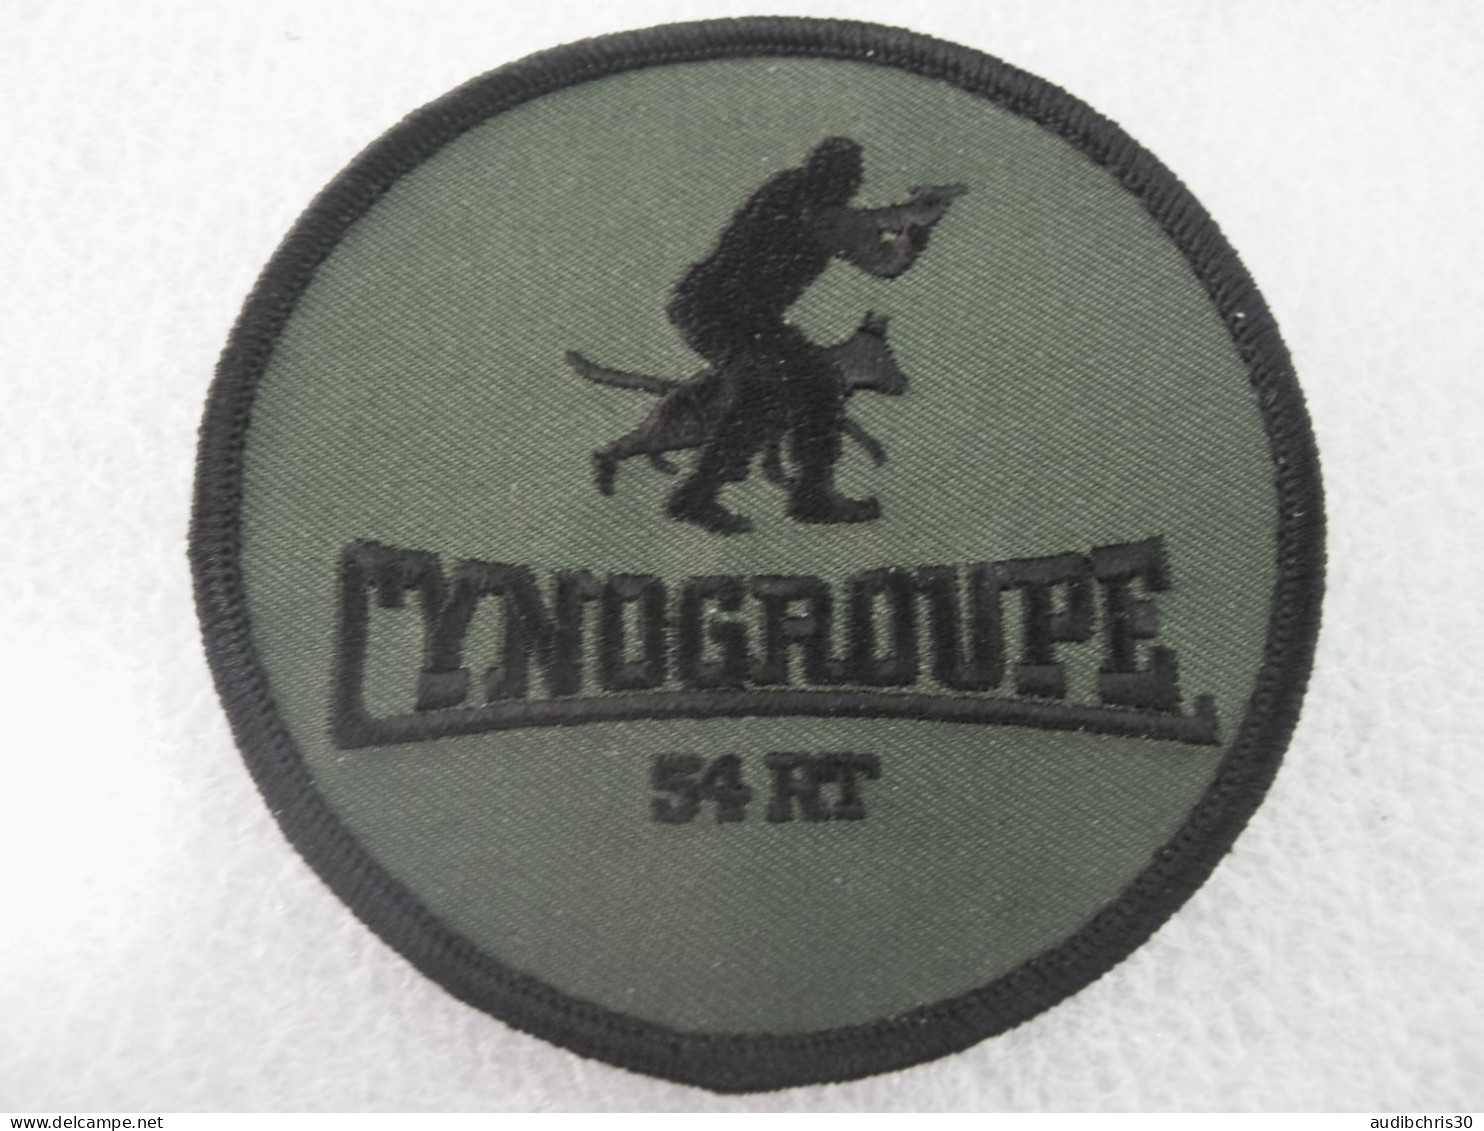 ECUSSON TRANSMISSIONS 54° RT LE GROUPE CYNOPHILE CYNOGROUPE OPEX SCRATCH 90MM - Esercito